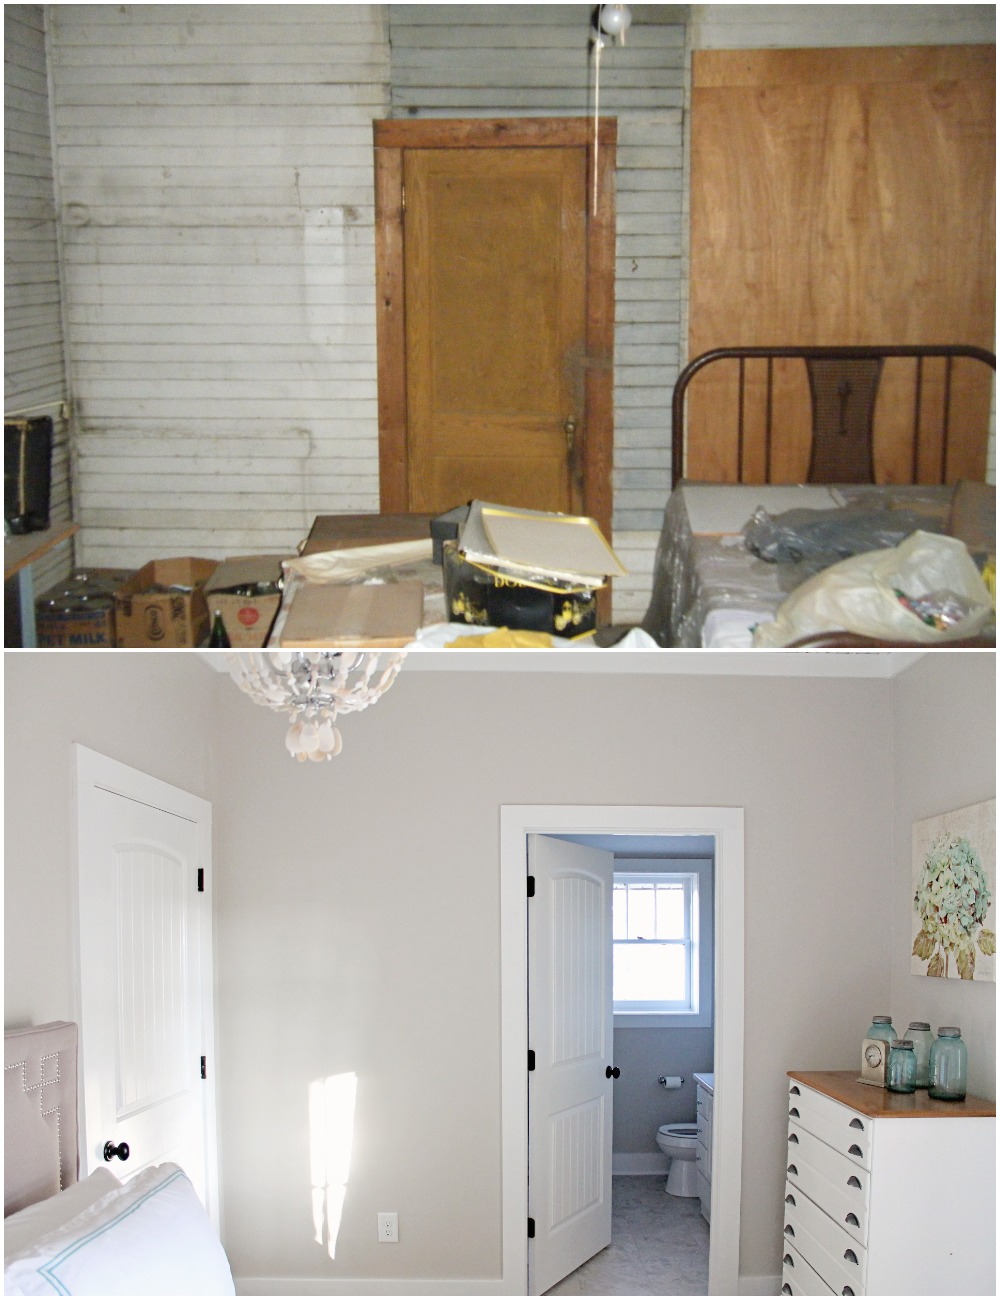 Elizabeth Burns Design  Budget-Friendly Fixer Upper Farmhouse Before and After House Flip - DIY Guest Bedroom with Aqua Accents - Sherwin Williams Agreeable Gray (5).jpg